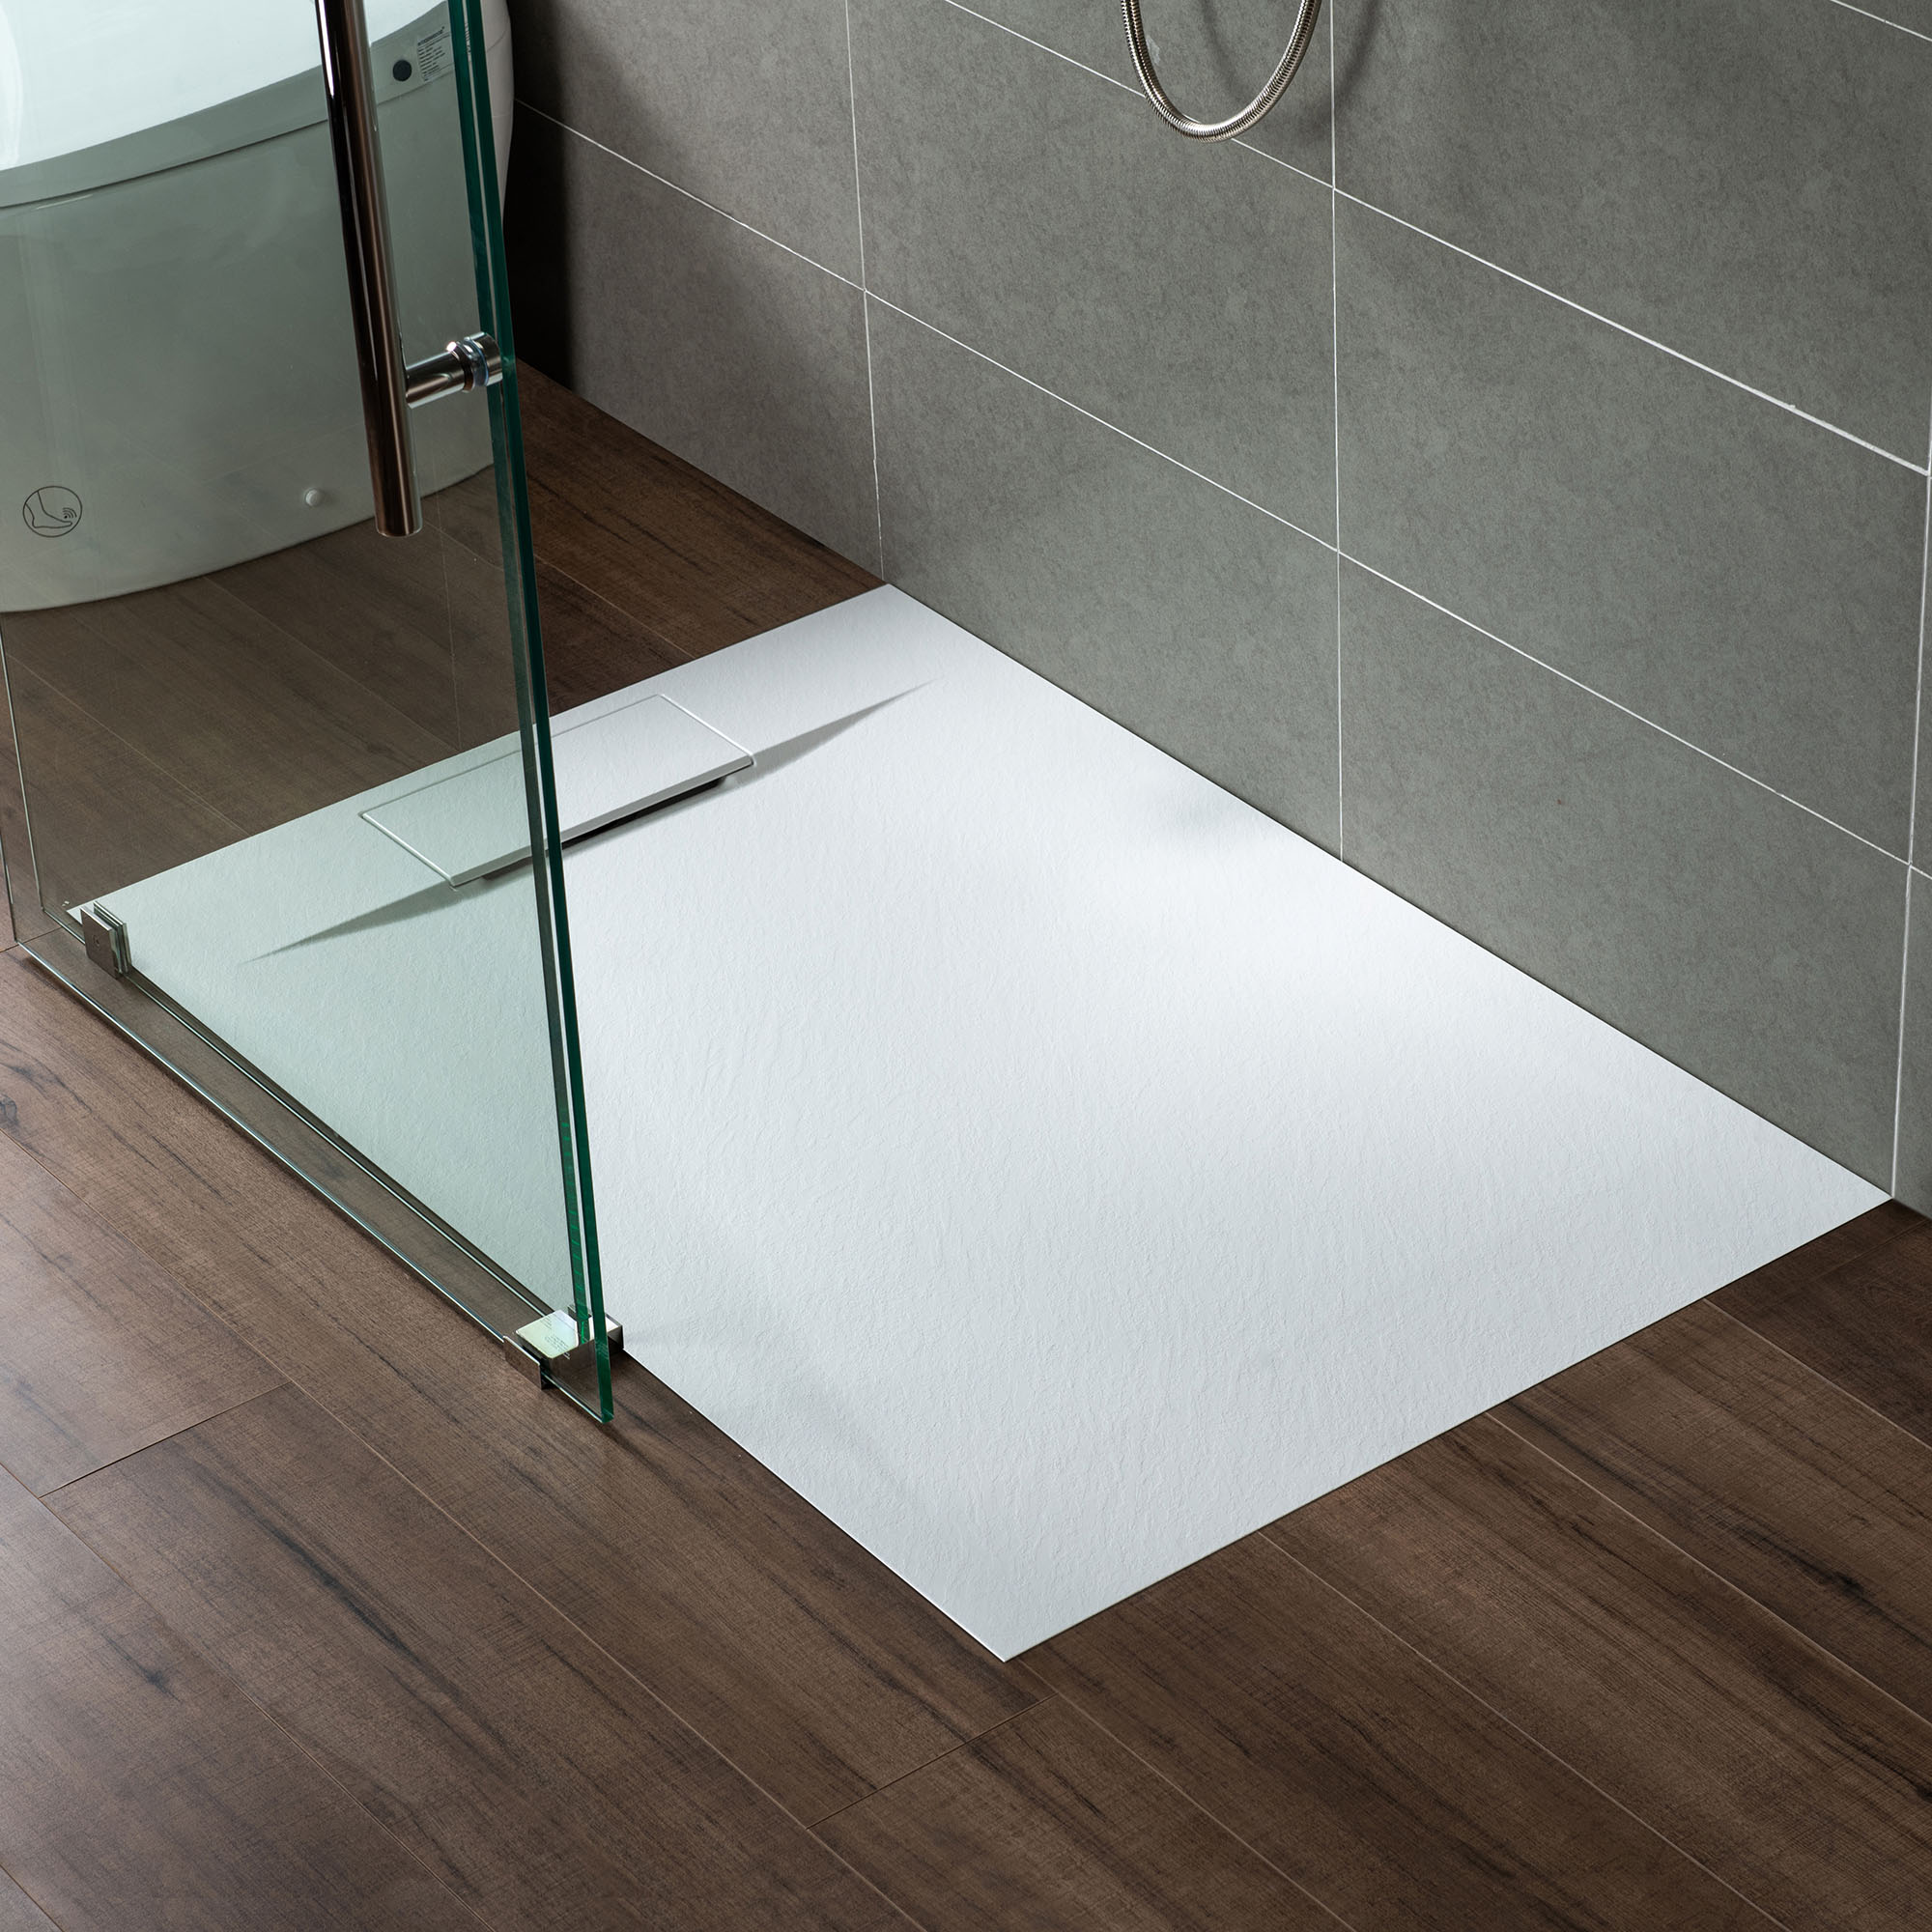  WOODBRIDGE 48-in L x 36-in W Zero Threshold End Drain Shower Base with Reversable Drain Placement, Matching Decorative Drain Plate and Tile Flange, Wheel Chair Access, Low Profile, White_12403